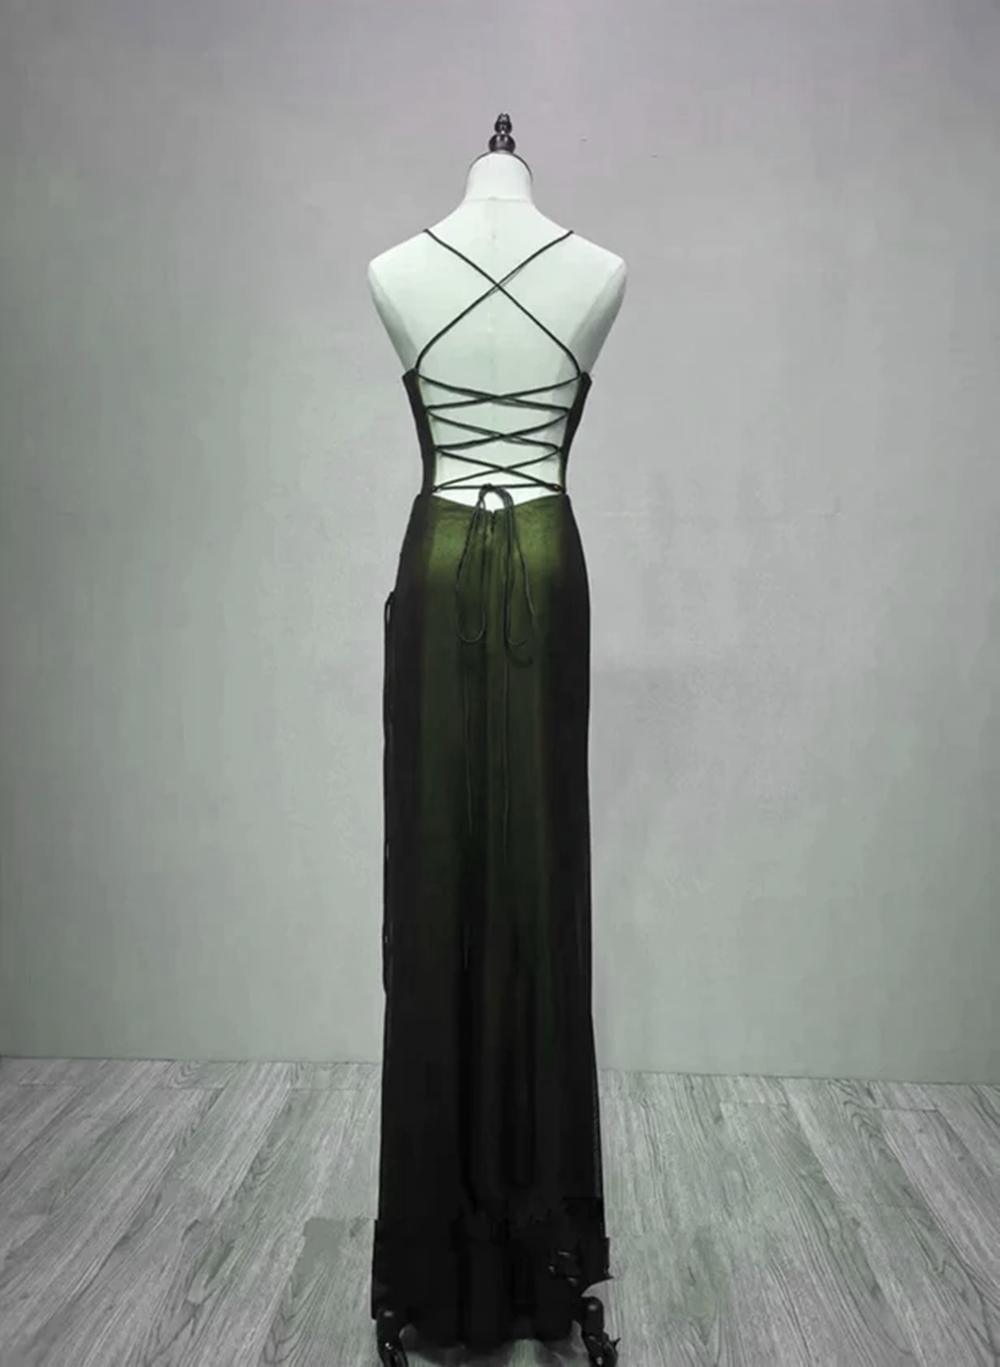 Black and Green Straps Long Formal Dress, Long Evening Party Dress Prom Dress